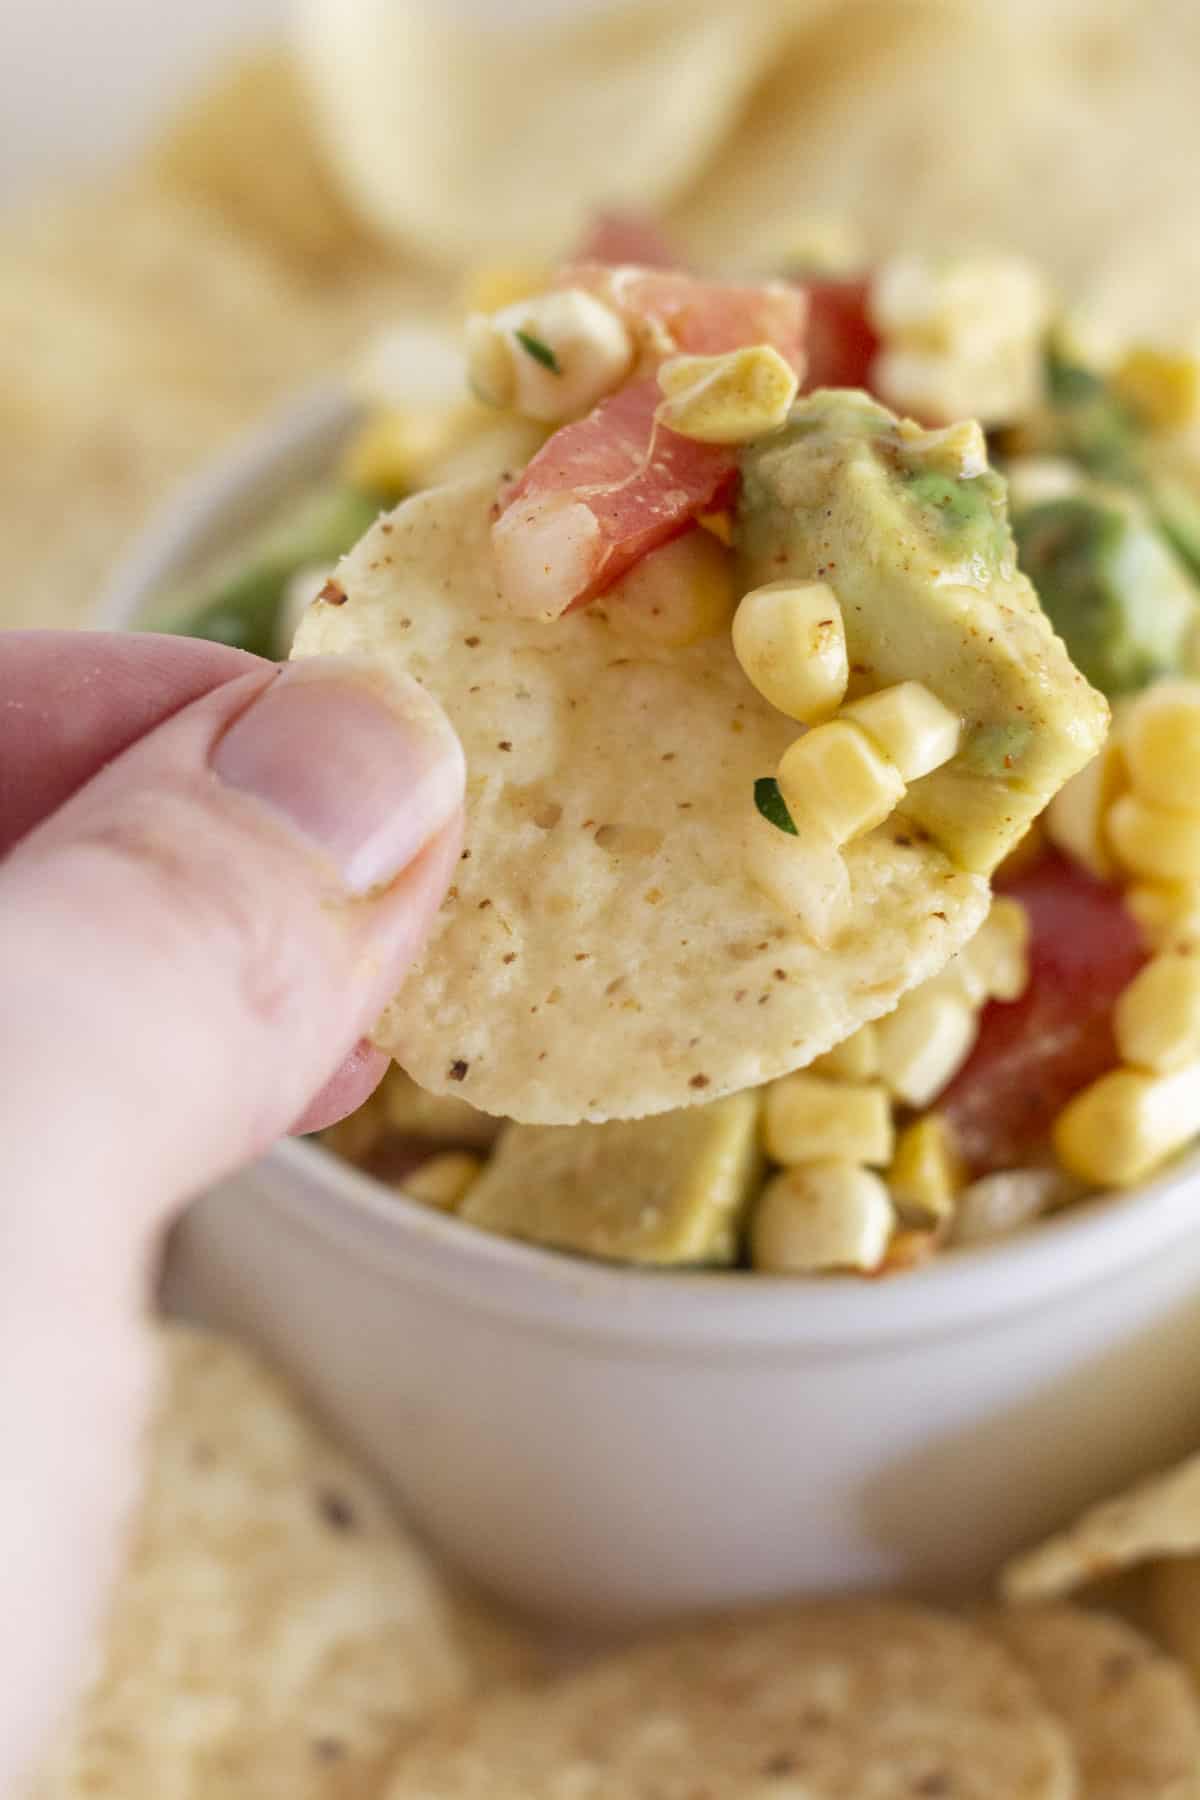 Dipping corn chips in the corn and avocado salsa.